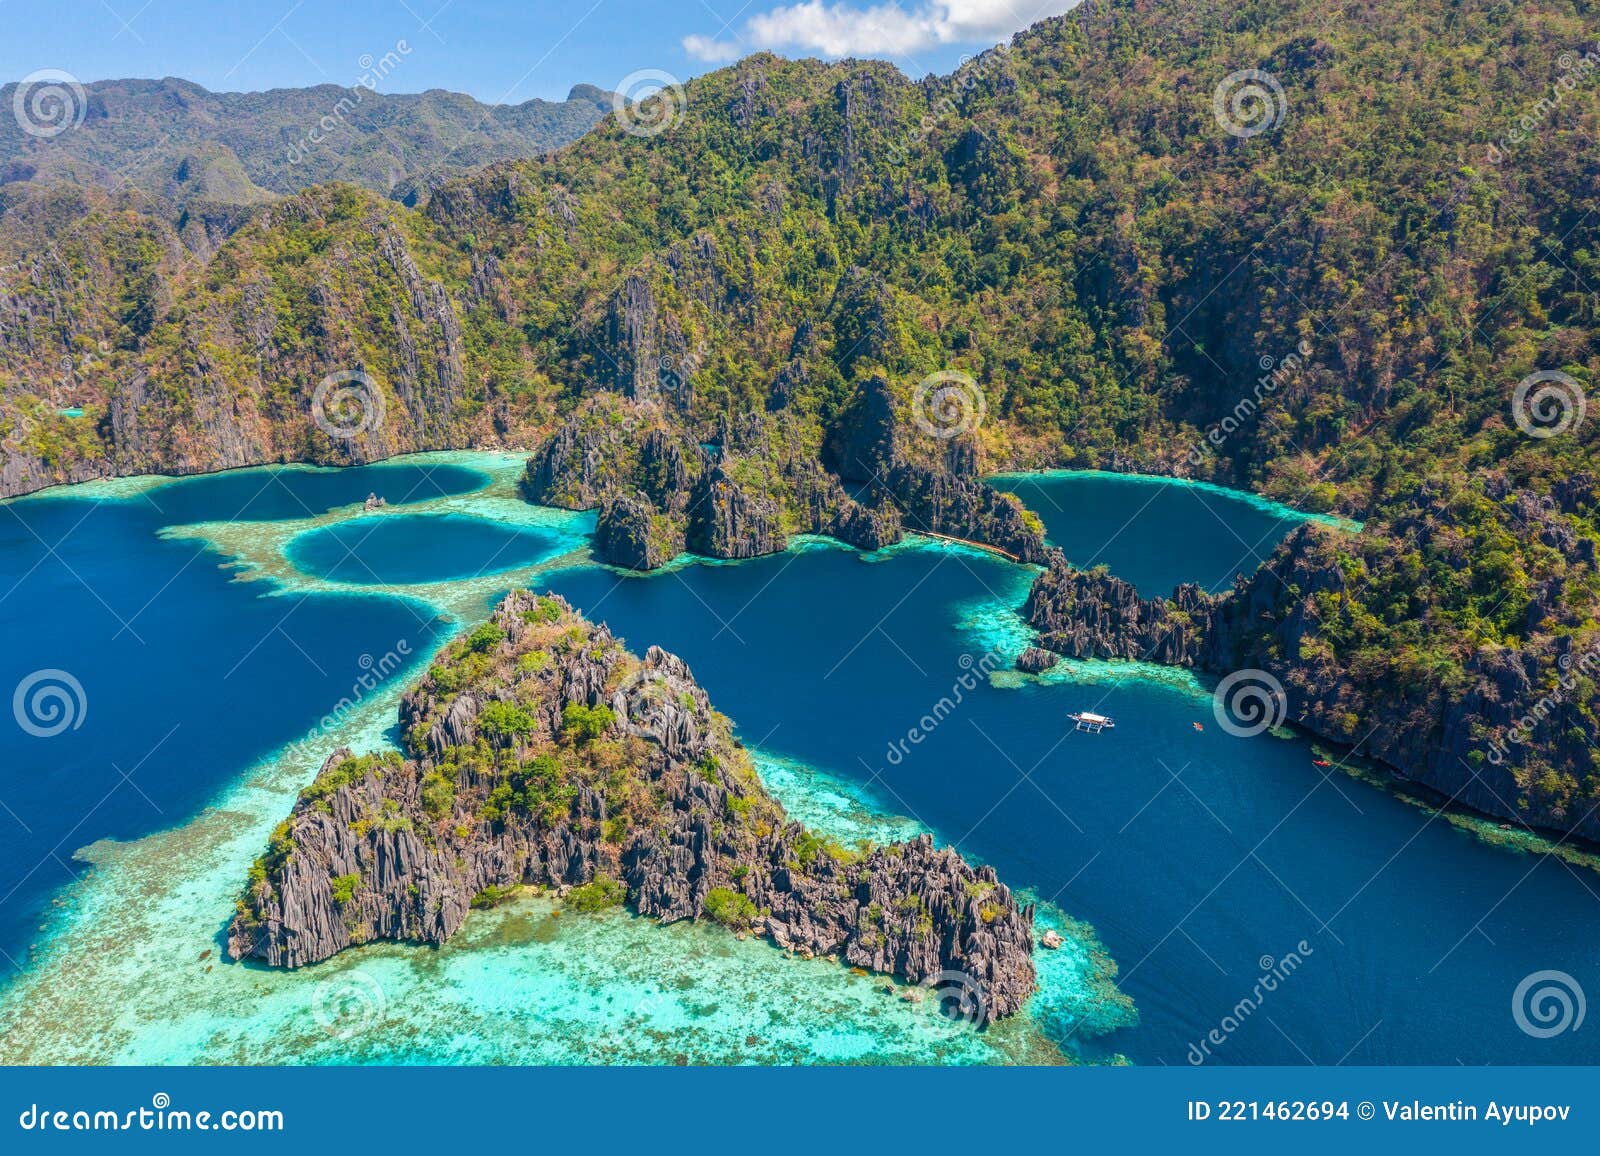 aerial view of turquoise tropical lagoon with limestone cliffs in coron island, palawan, philippines. unesco world